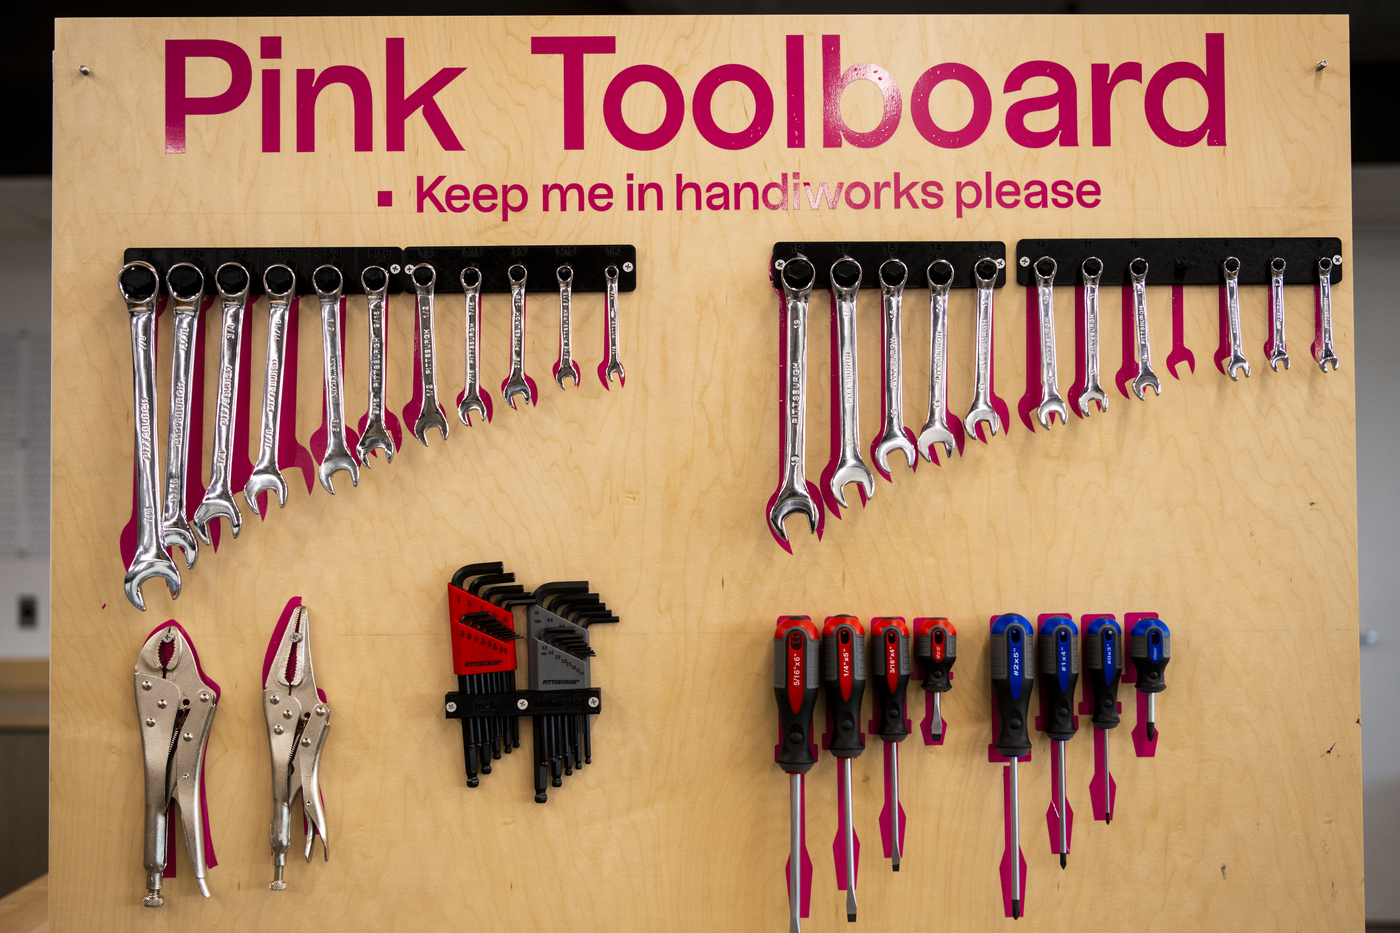 A pink toolboard with hand tools